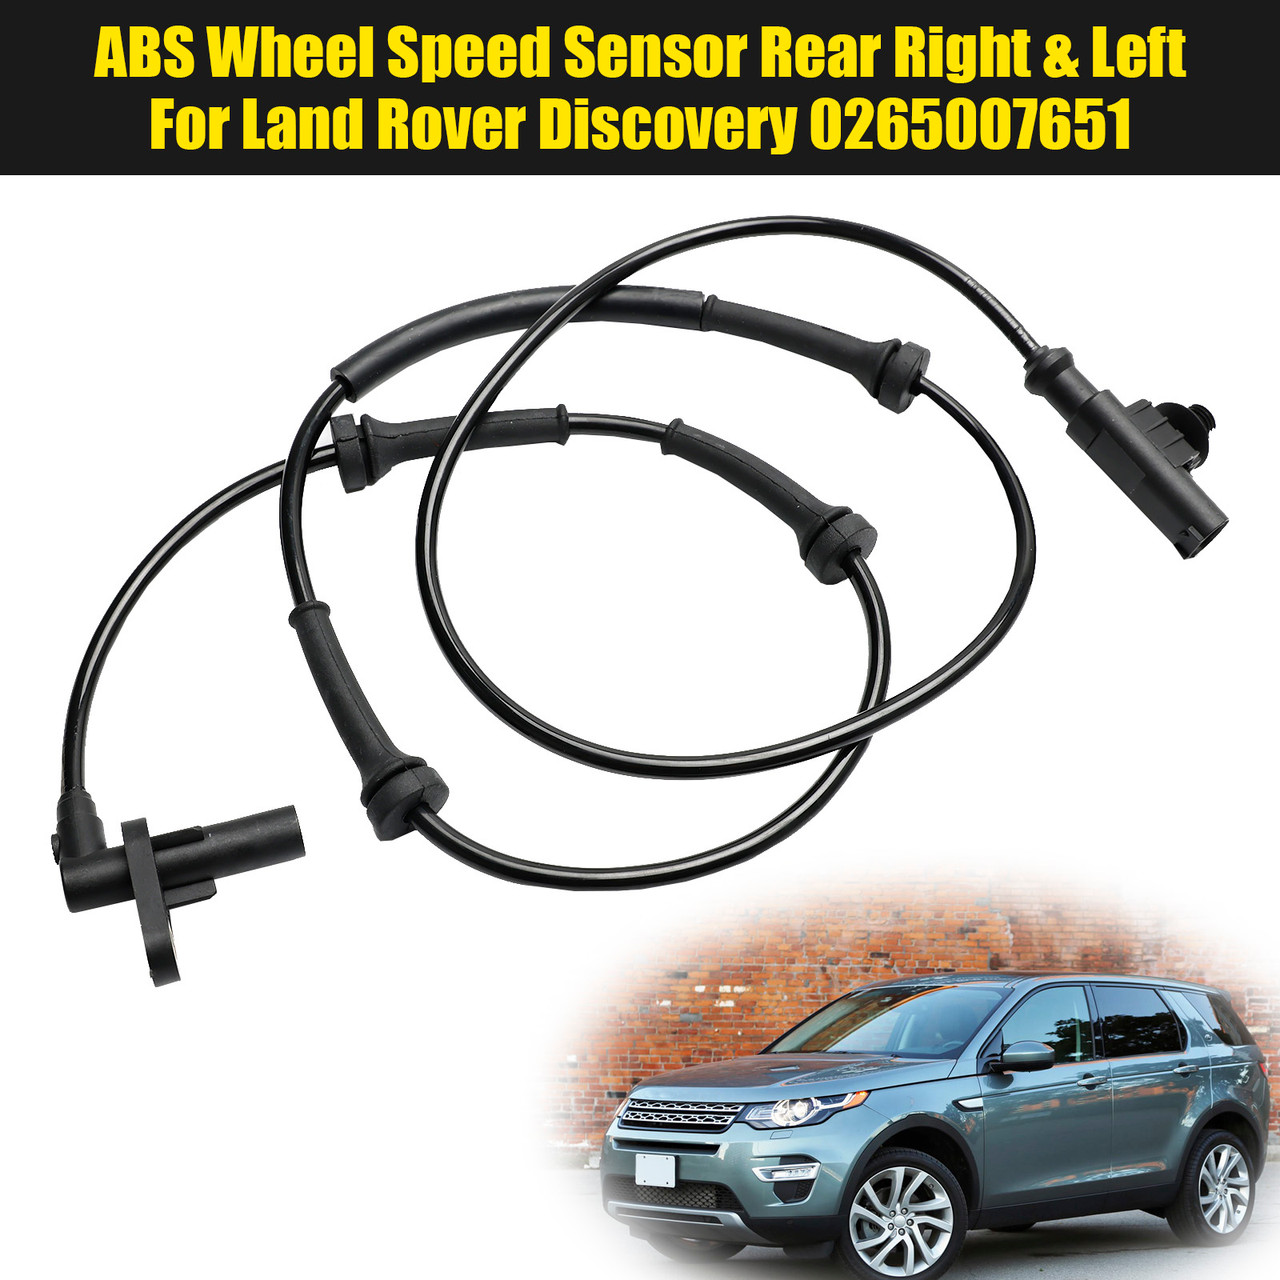 ABS Wheel Speed Sensor Rear Right & Left For Land Rover Discovery 0265007651